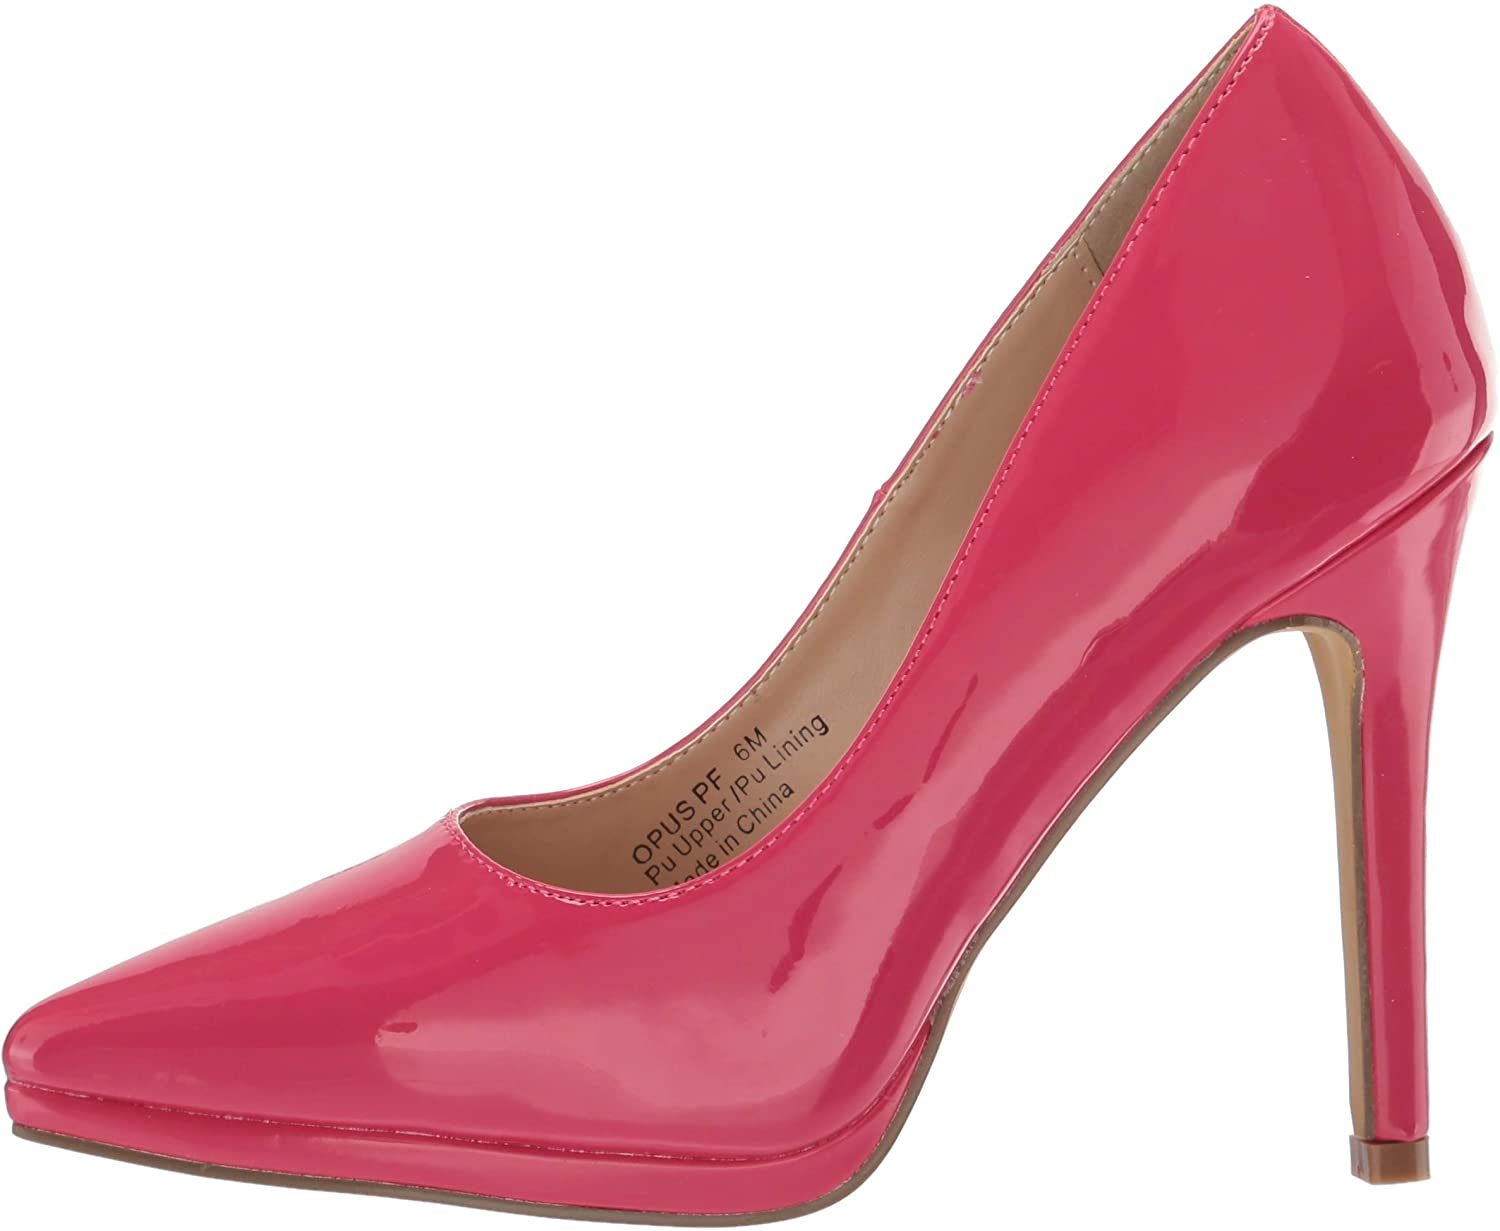 Penny Loves Kenny Opus PF Patent Hot Pink Pumps Heels Size 